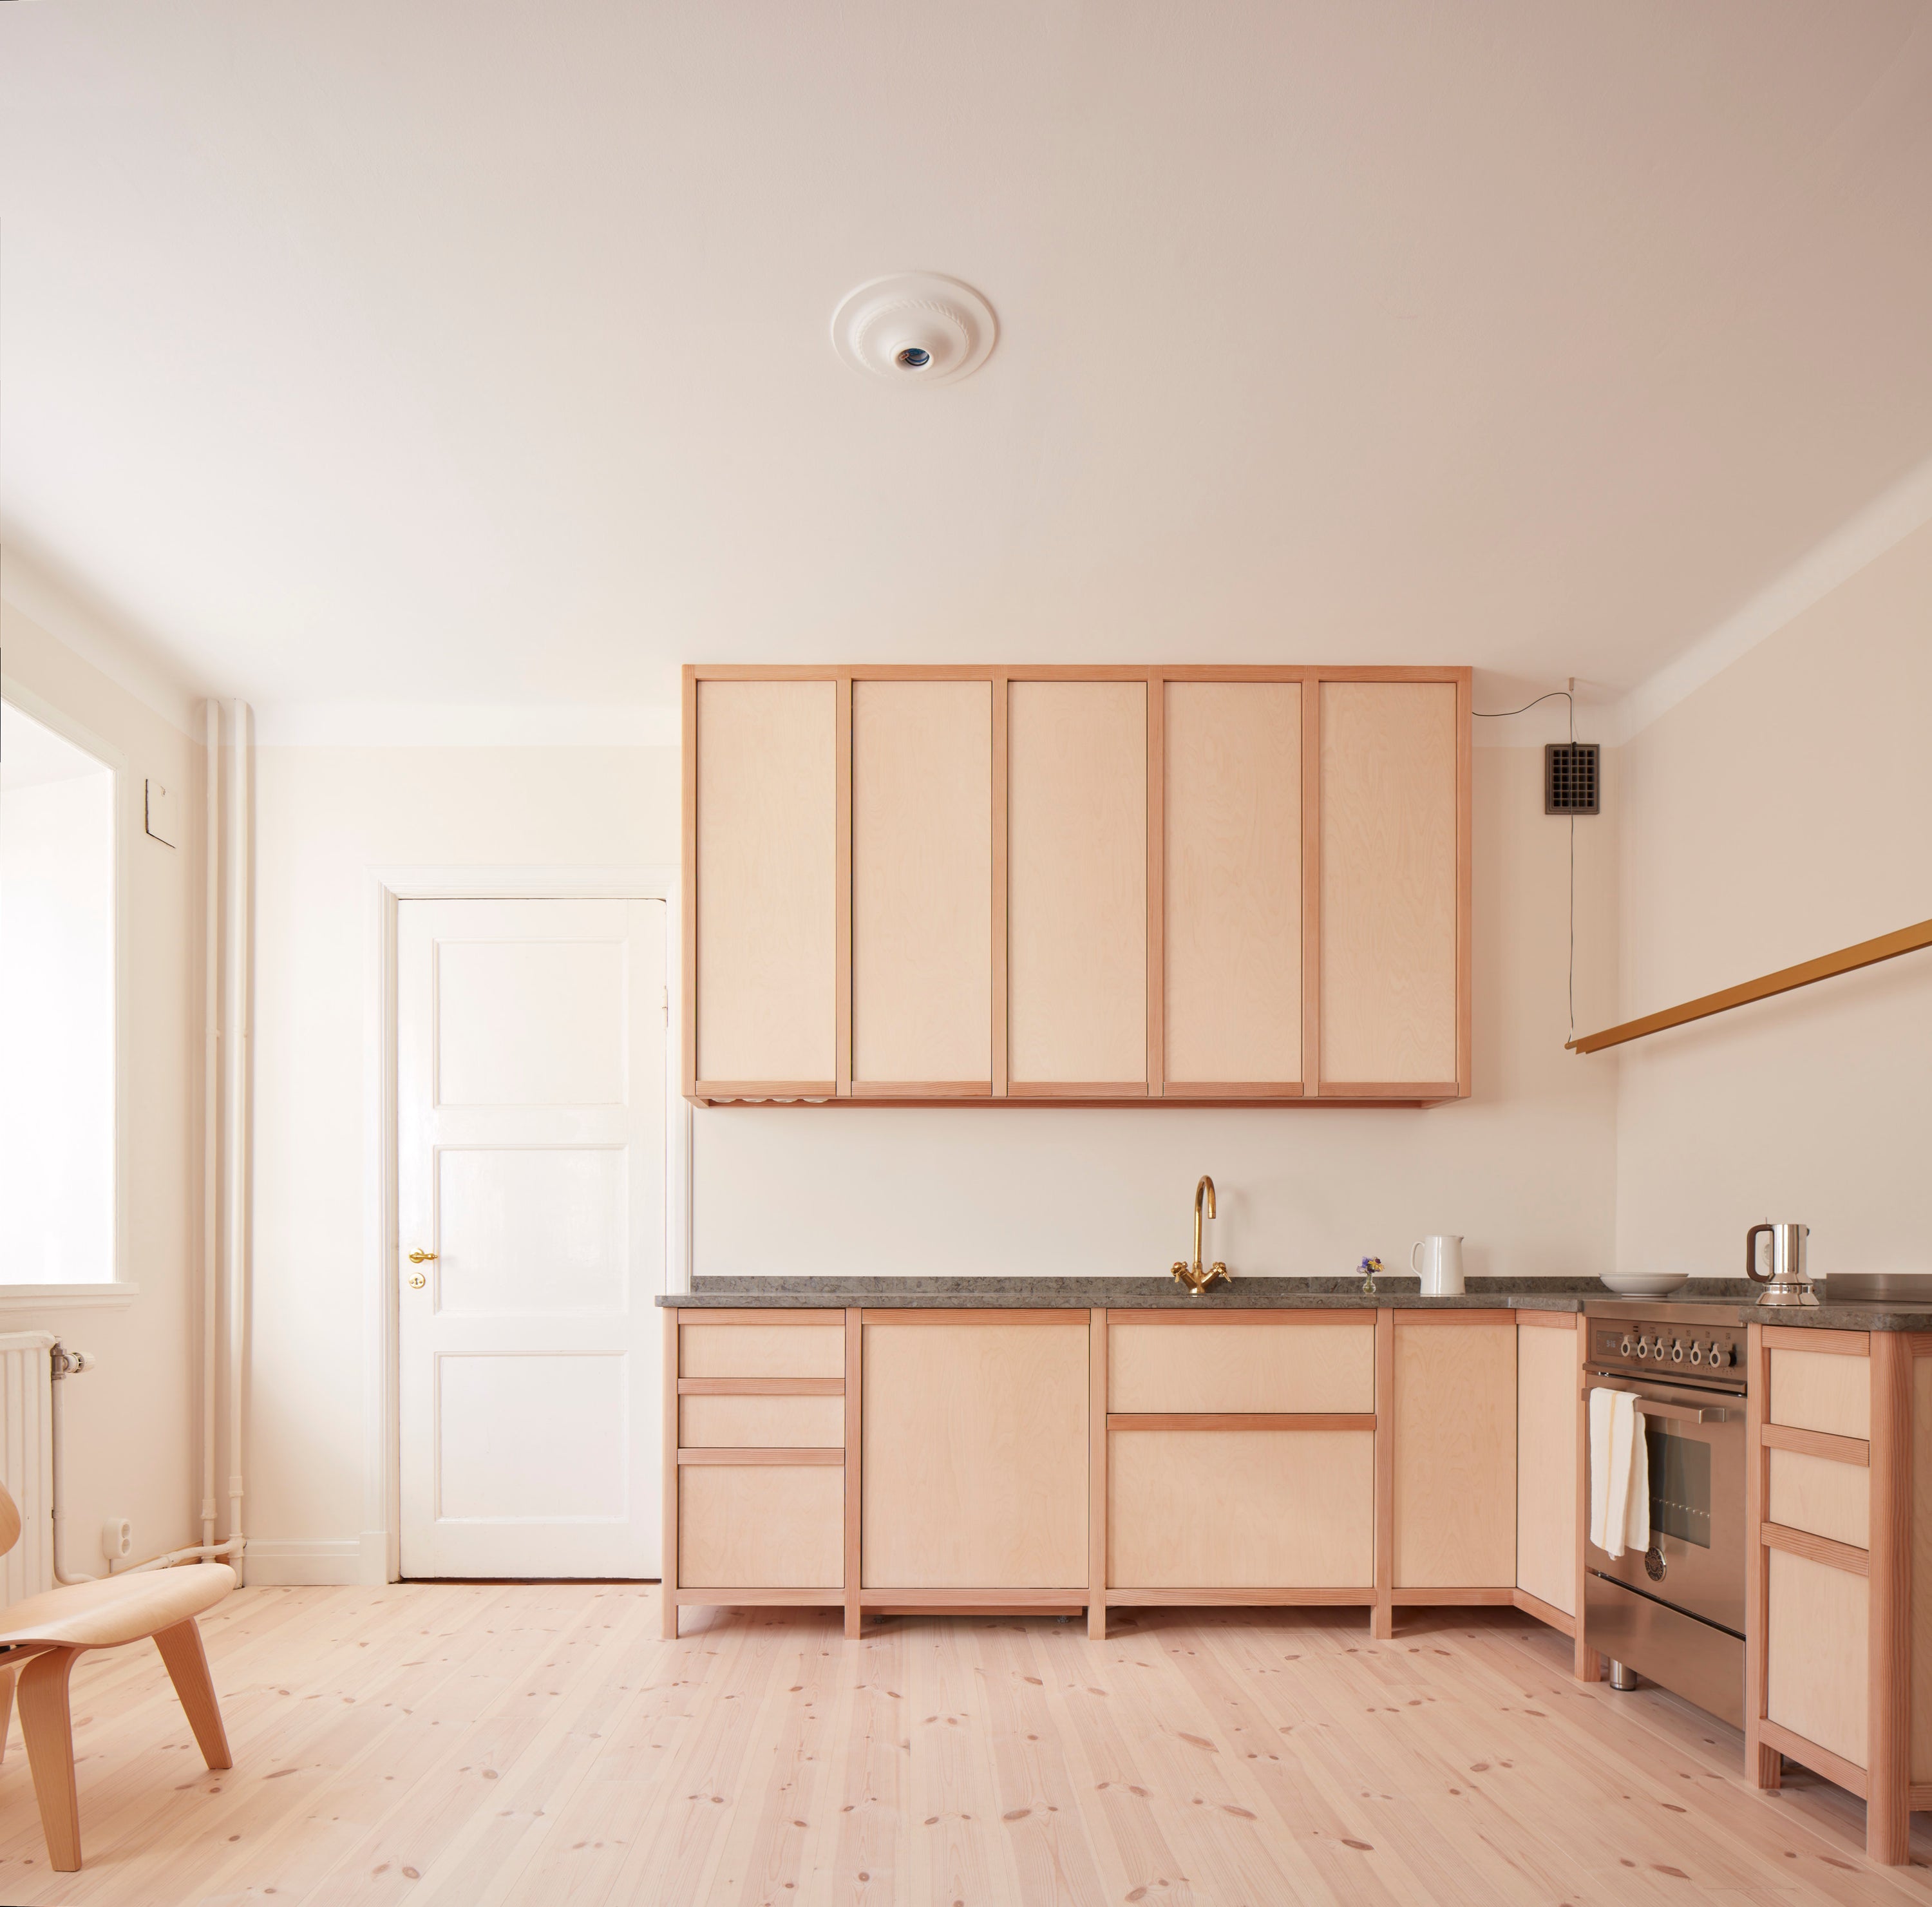 Kitchen in Oslo painted in colours designed by Daniel Rybakken for Blēo Collective